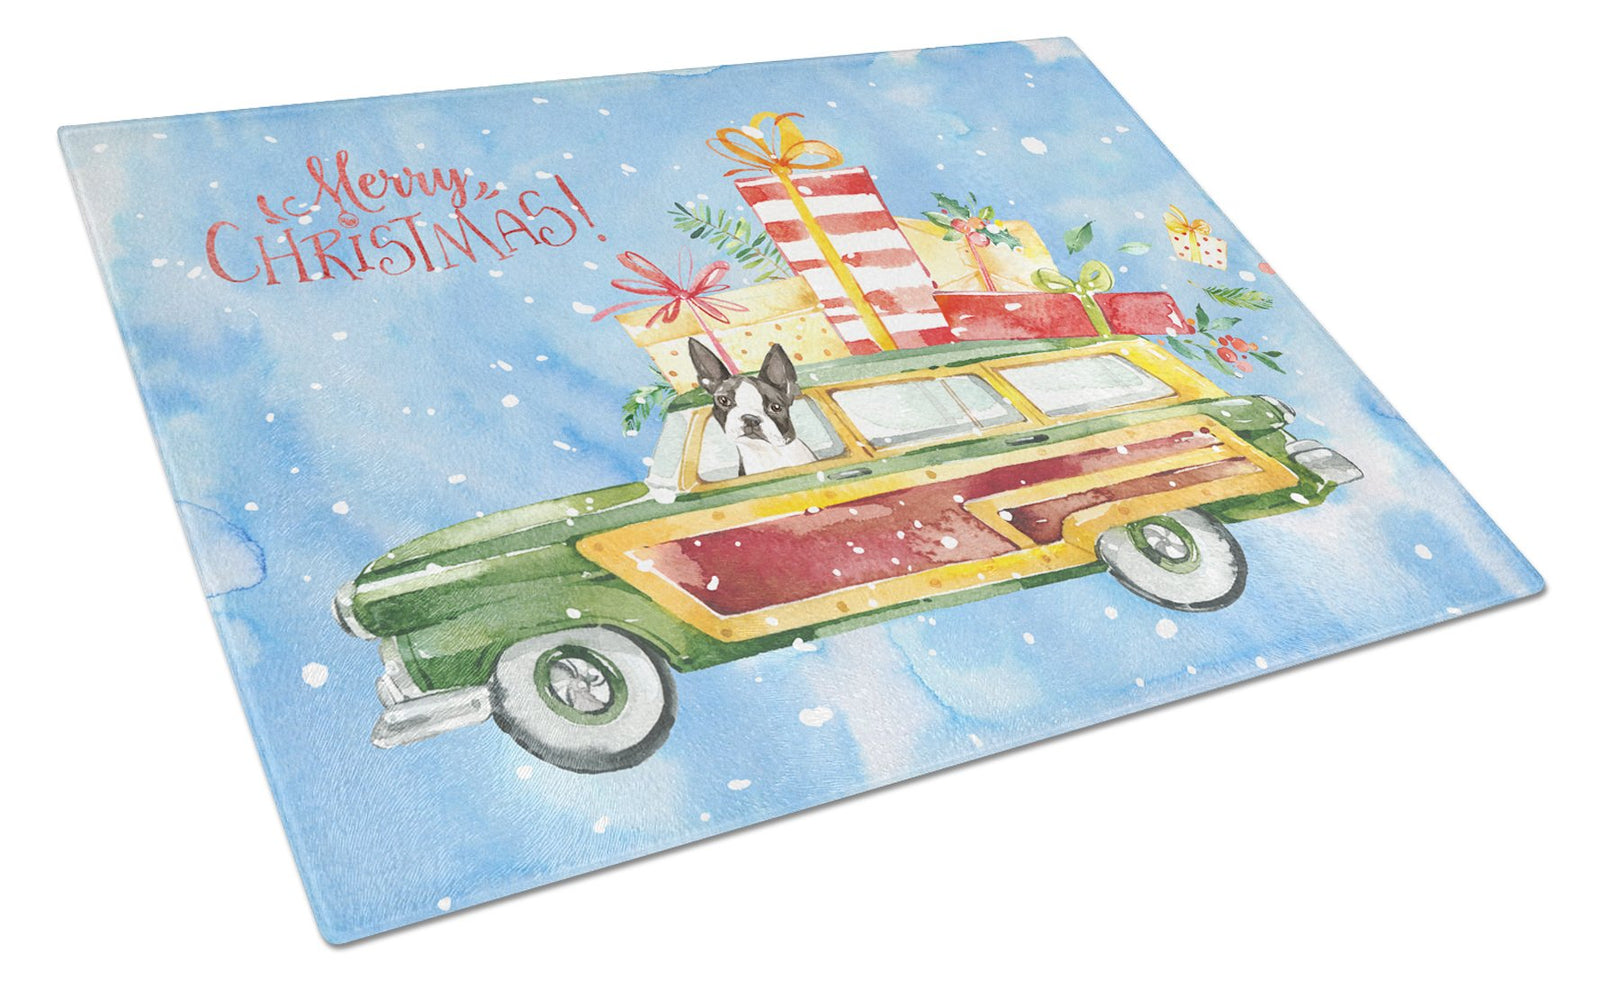 Merry Christmas Boston Terrier Glass Cutting Board Large CK2397LCB by Caroline's Treasures